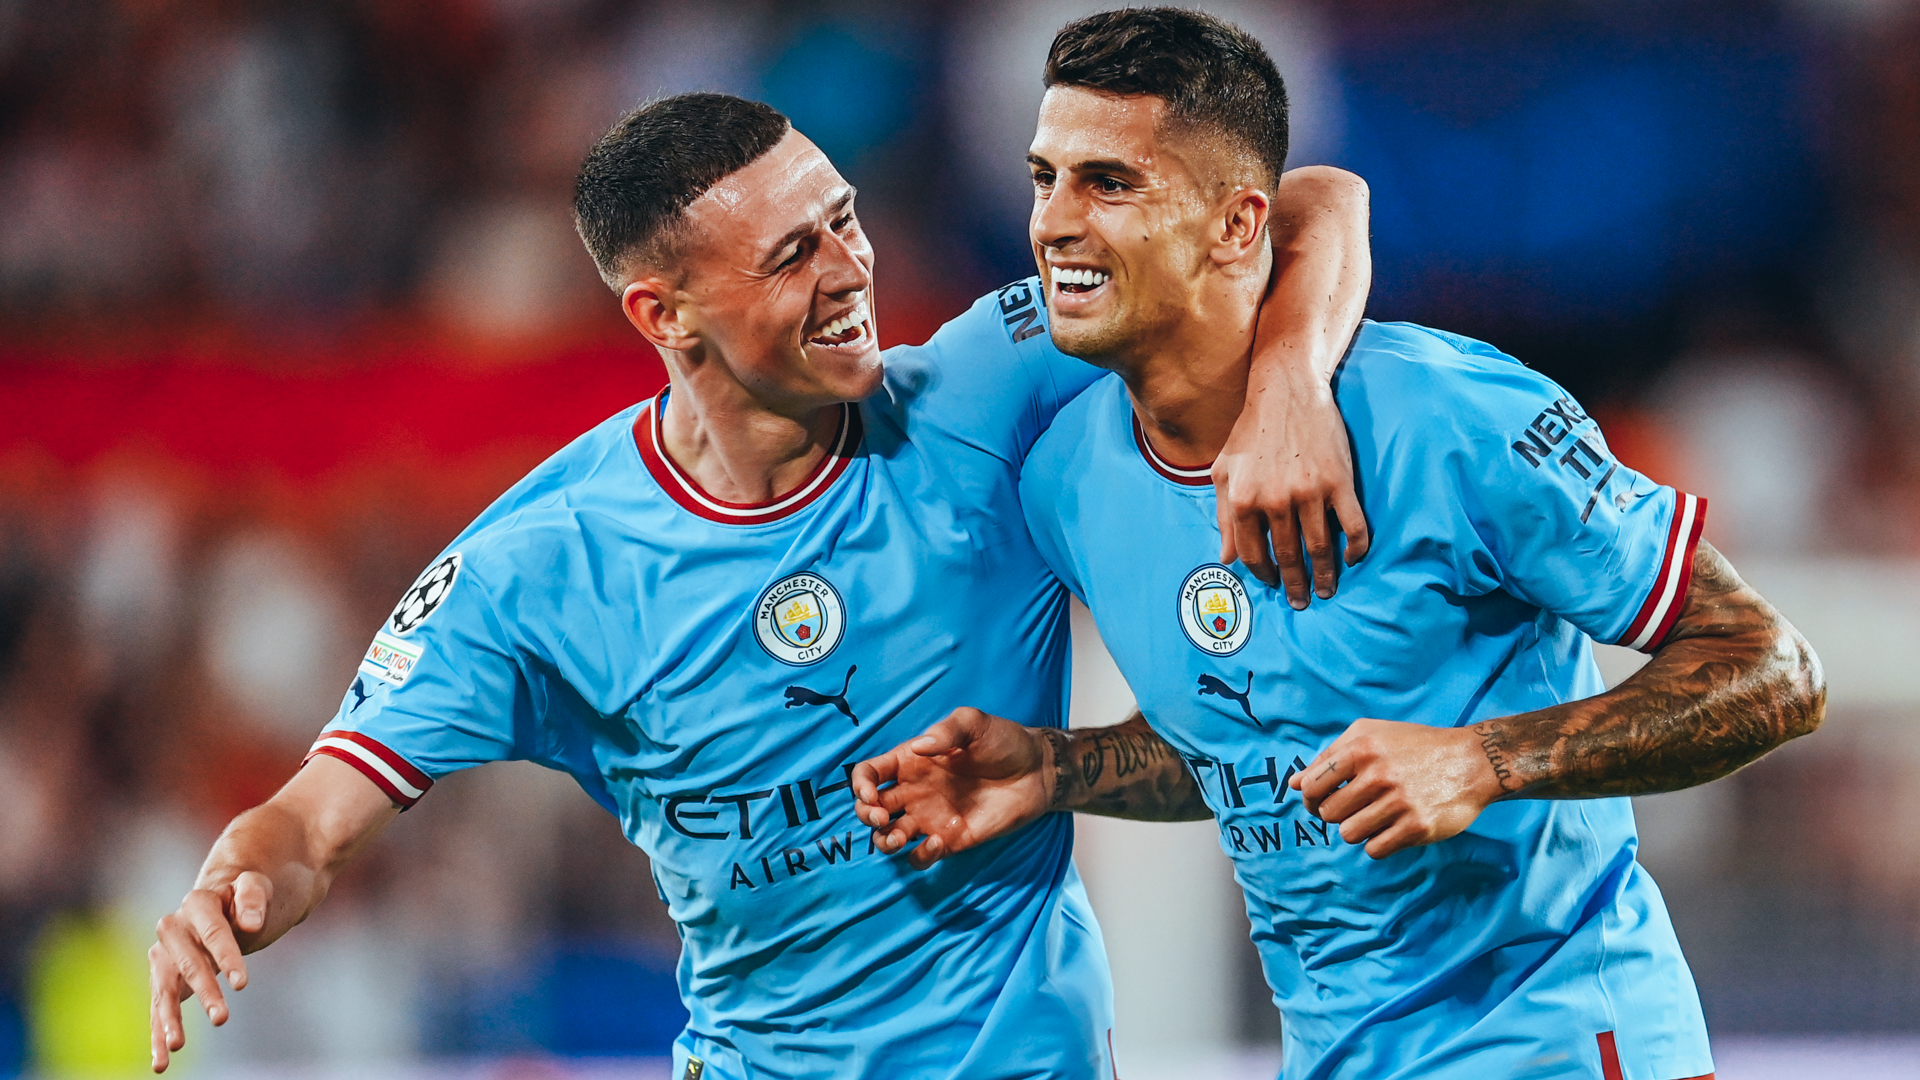 TWO'S COMPANY : Phil Foden celebrates his goal with Joao Cancelo